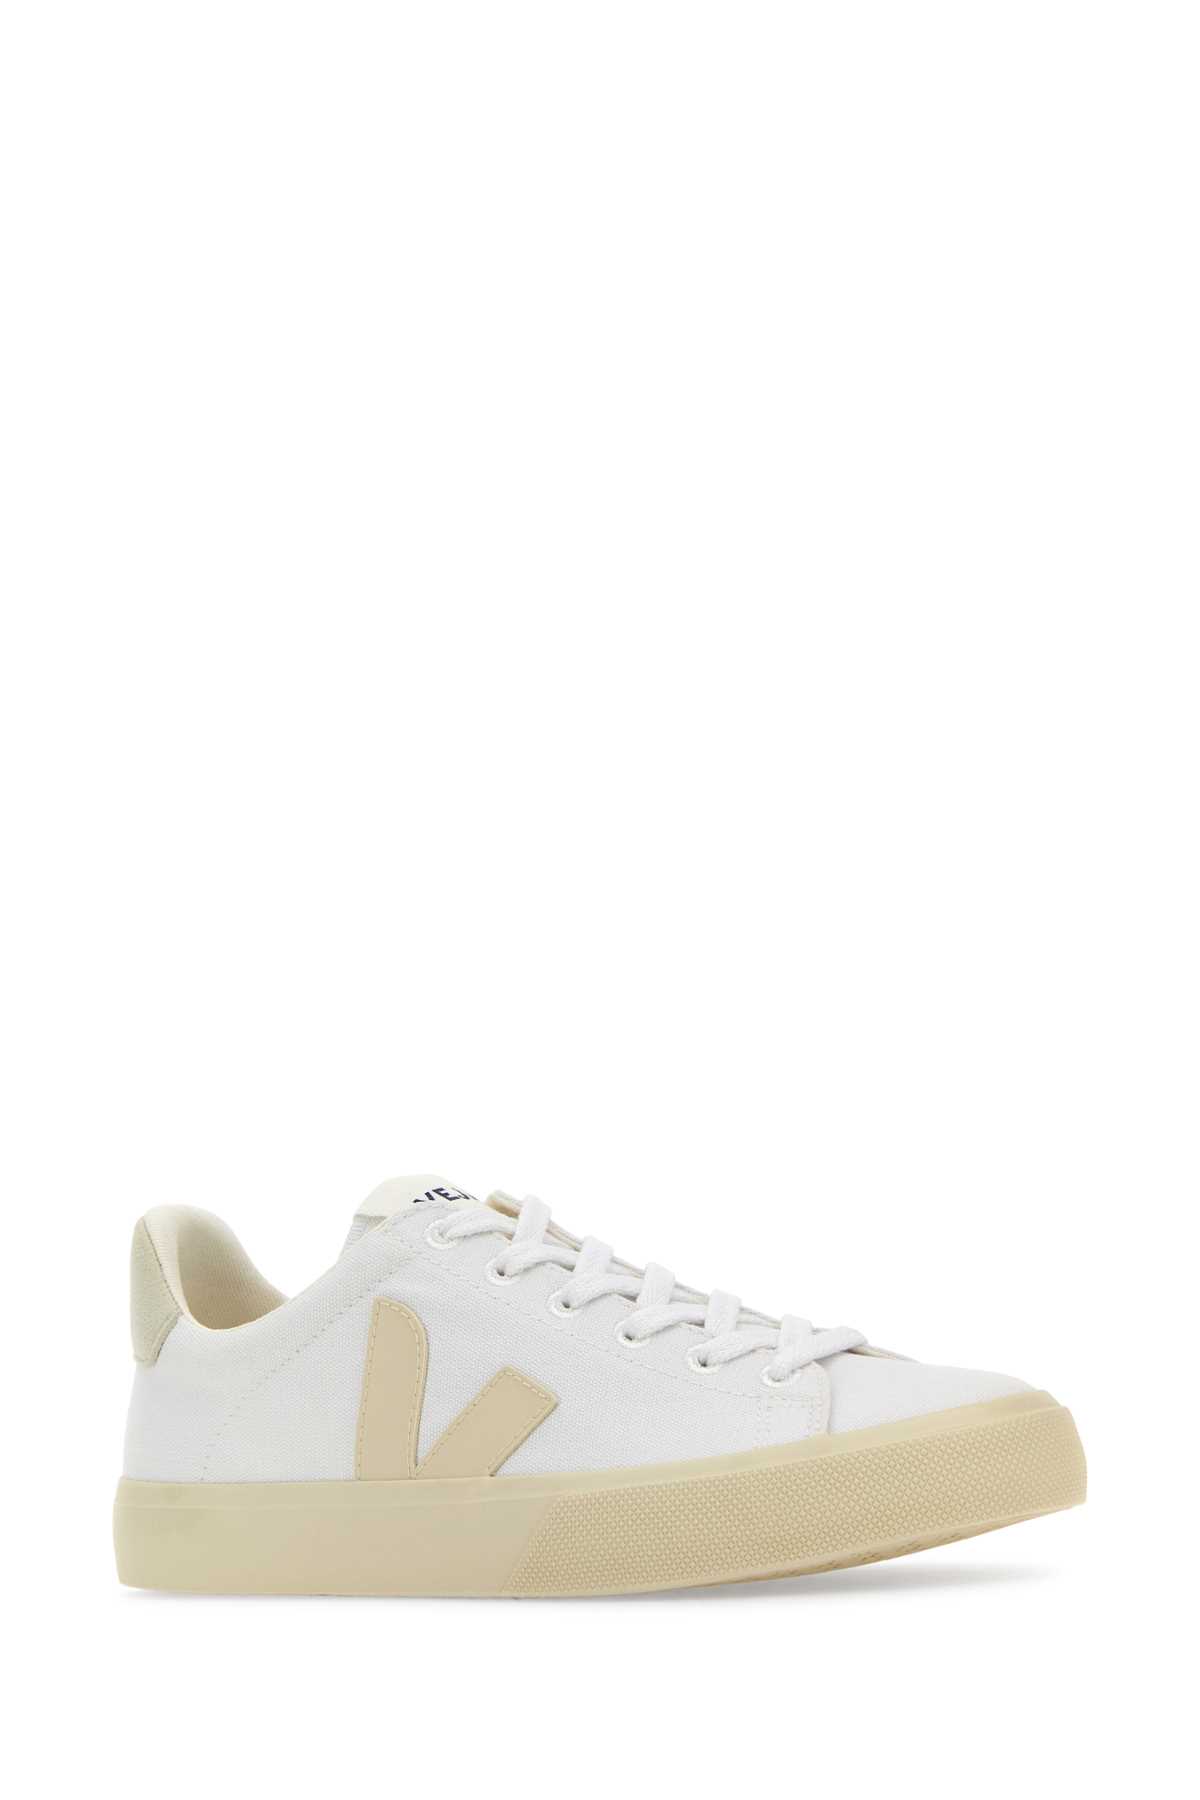 Veja White Canvas Campo Sneakers In Whitepierre